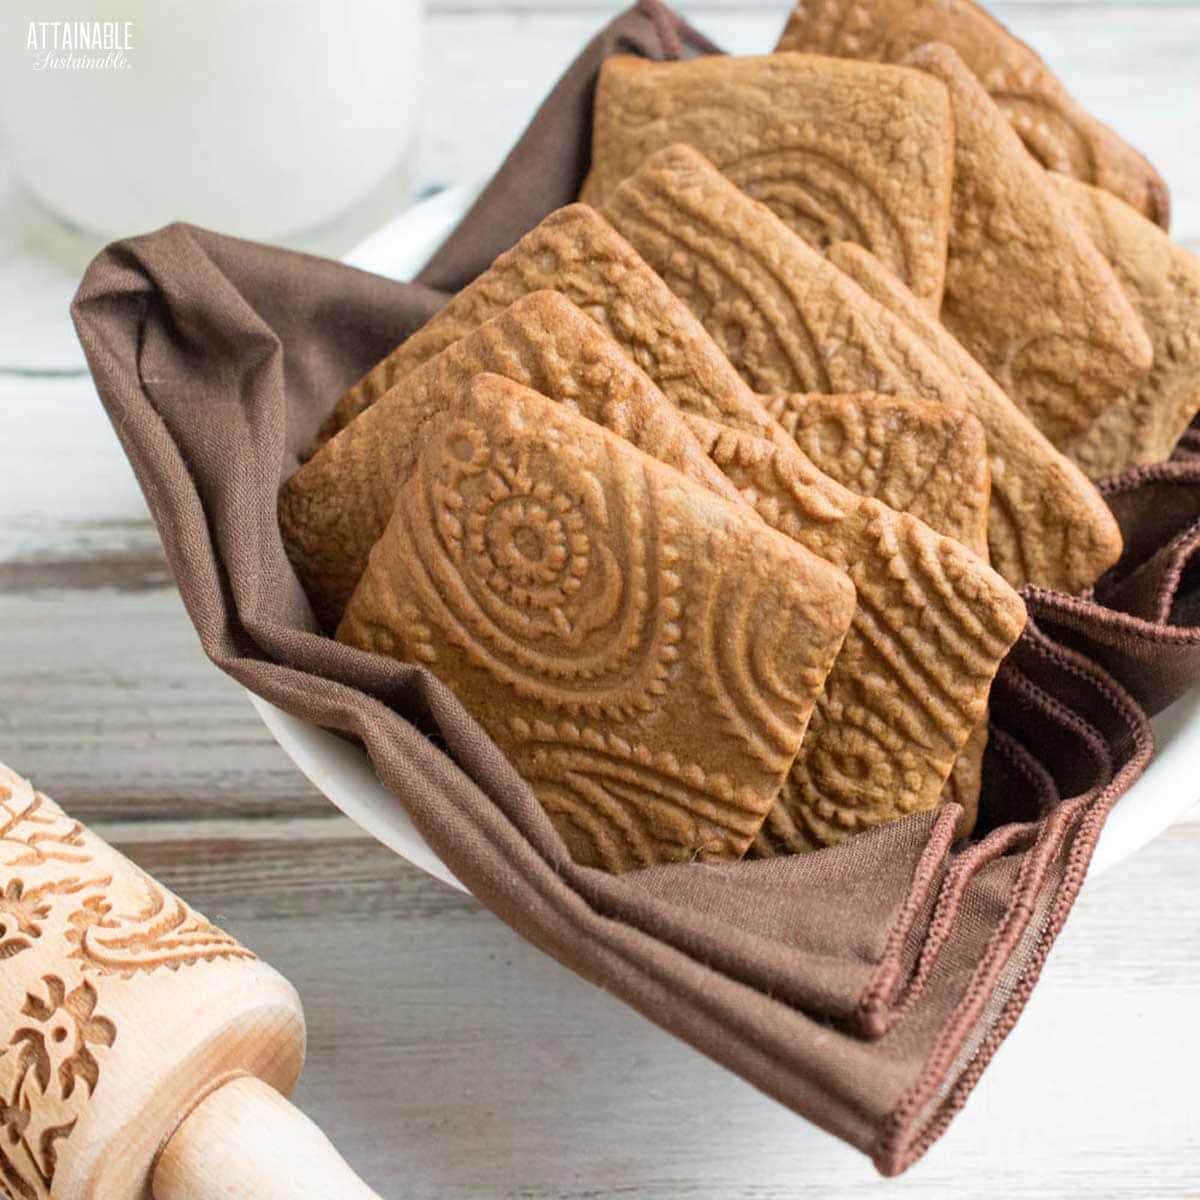 cookies in a basket lined with brown linen.